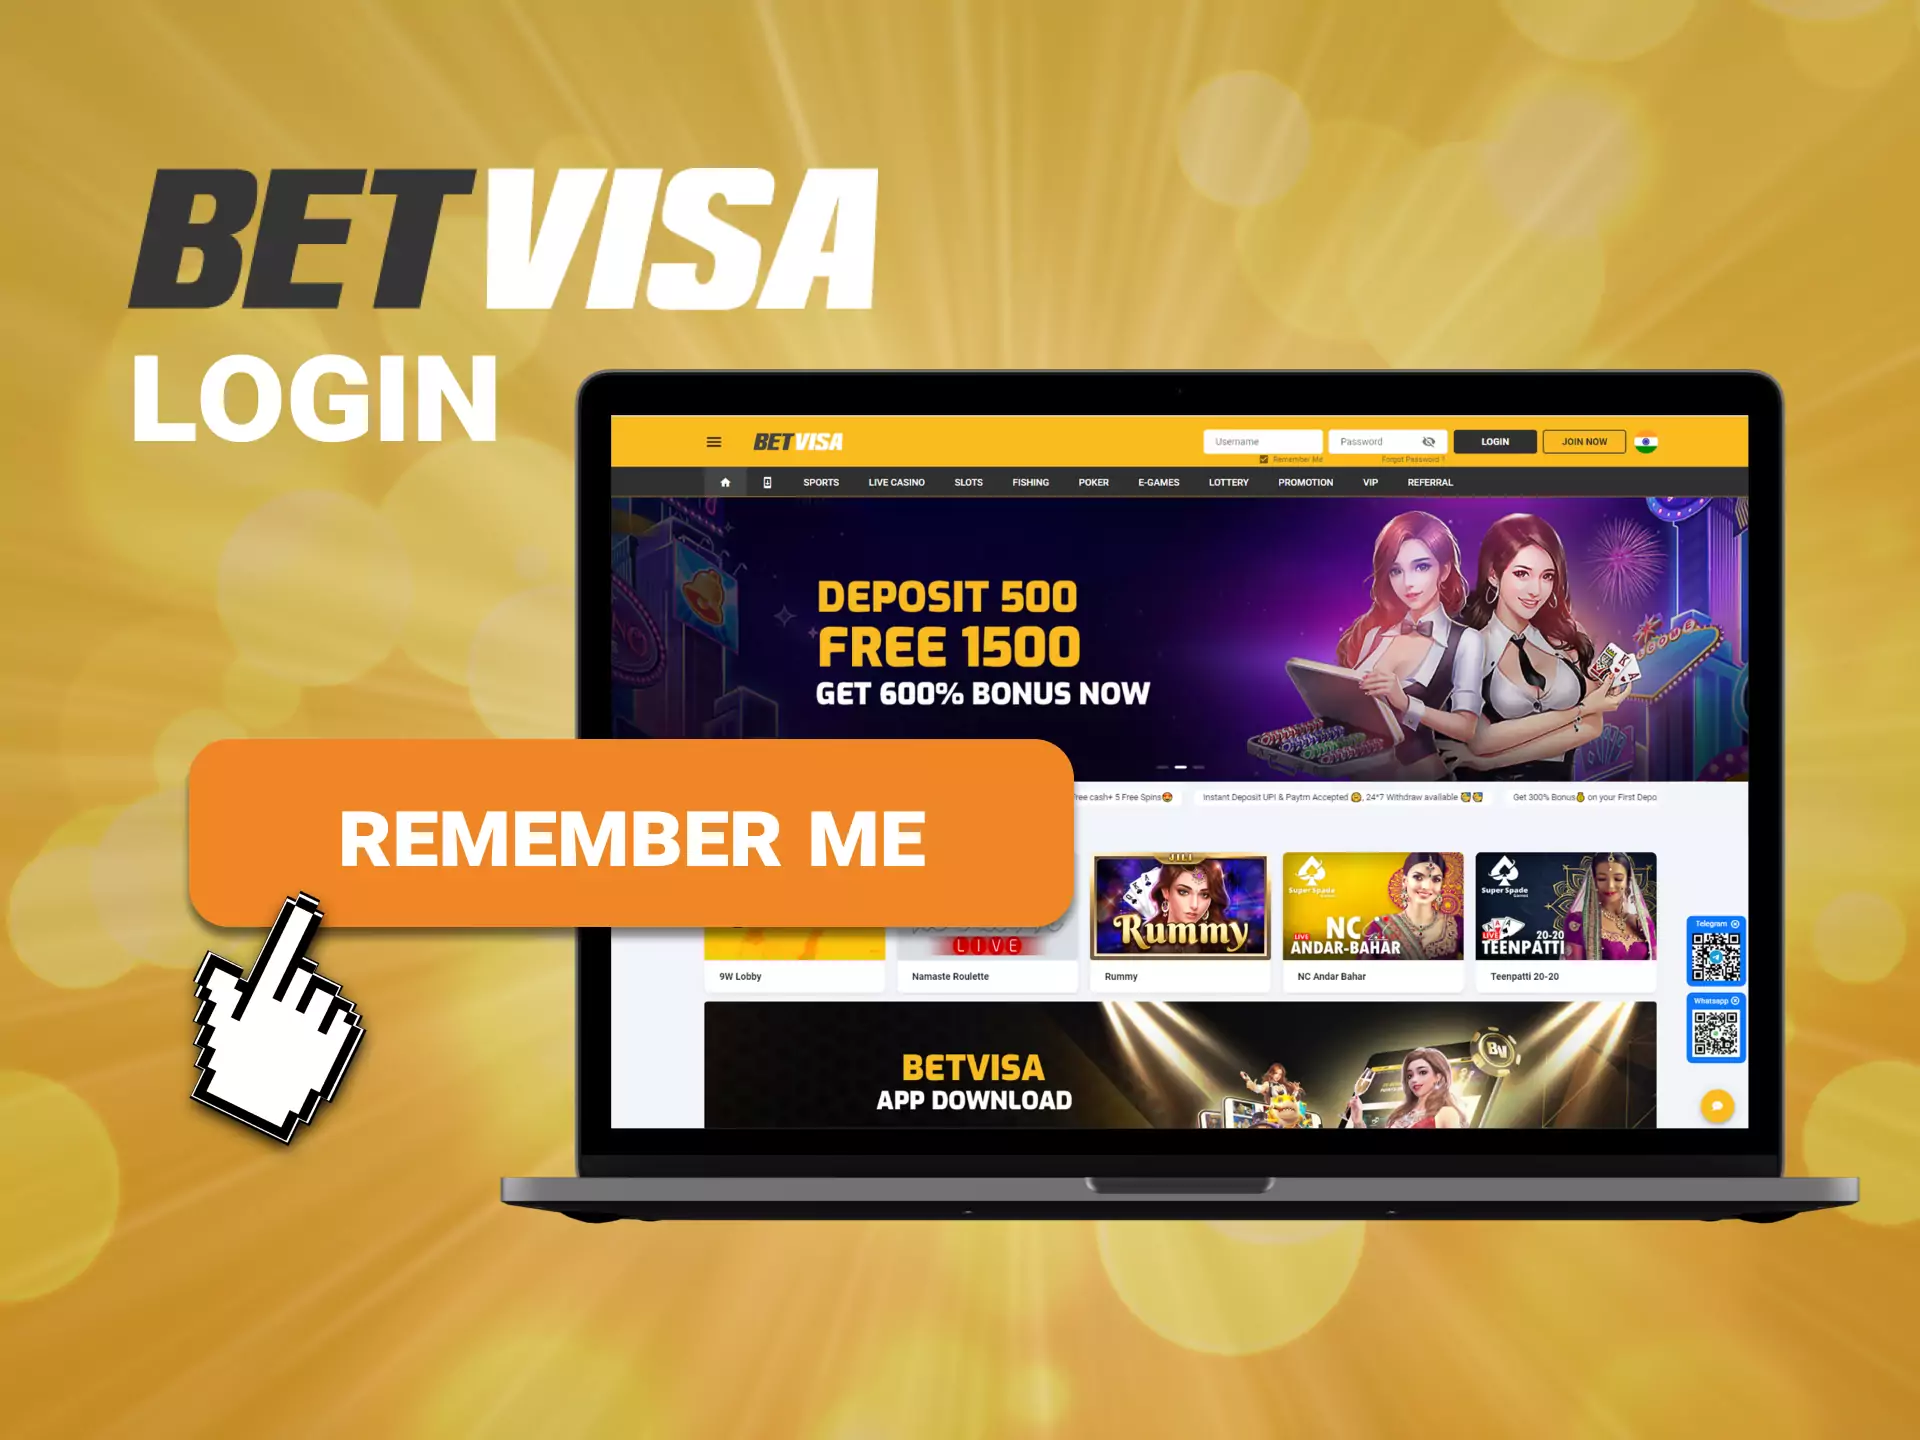 To start betting or playing casinos on Betvisa, you need to login into your account.